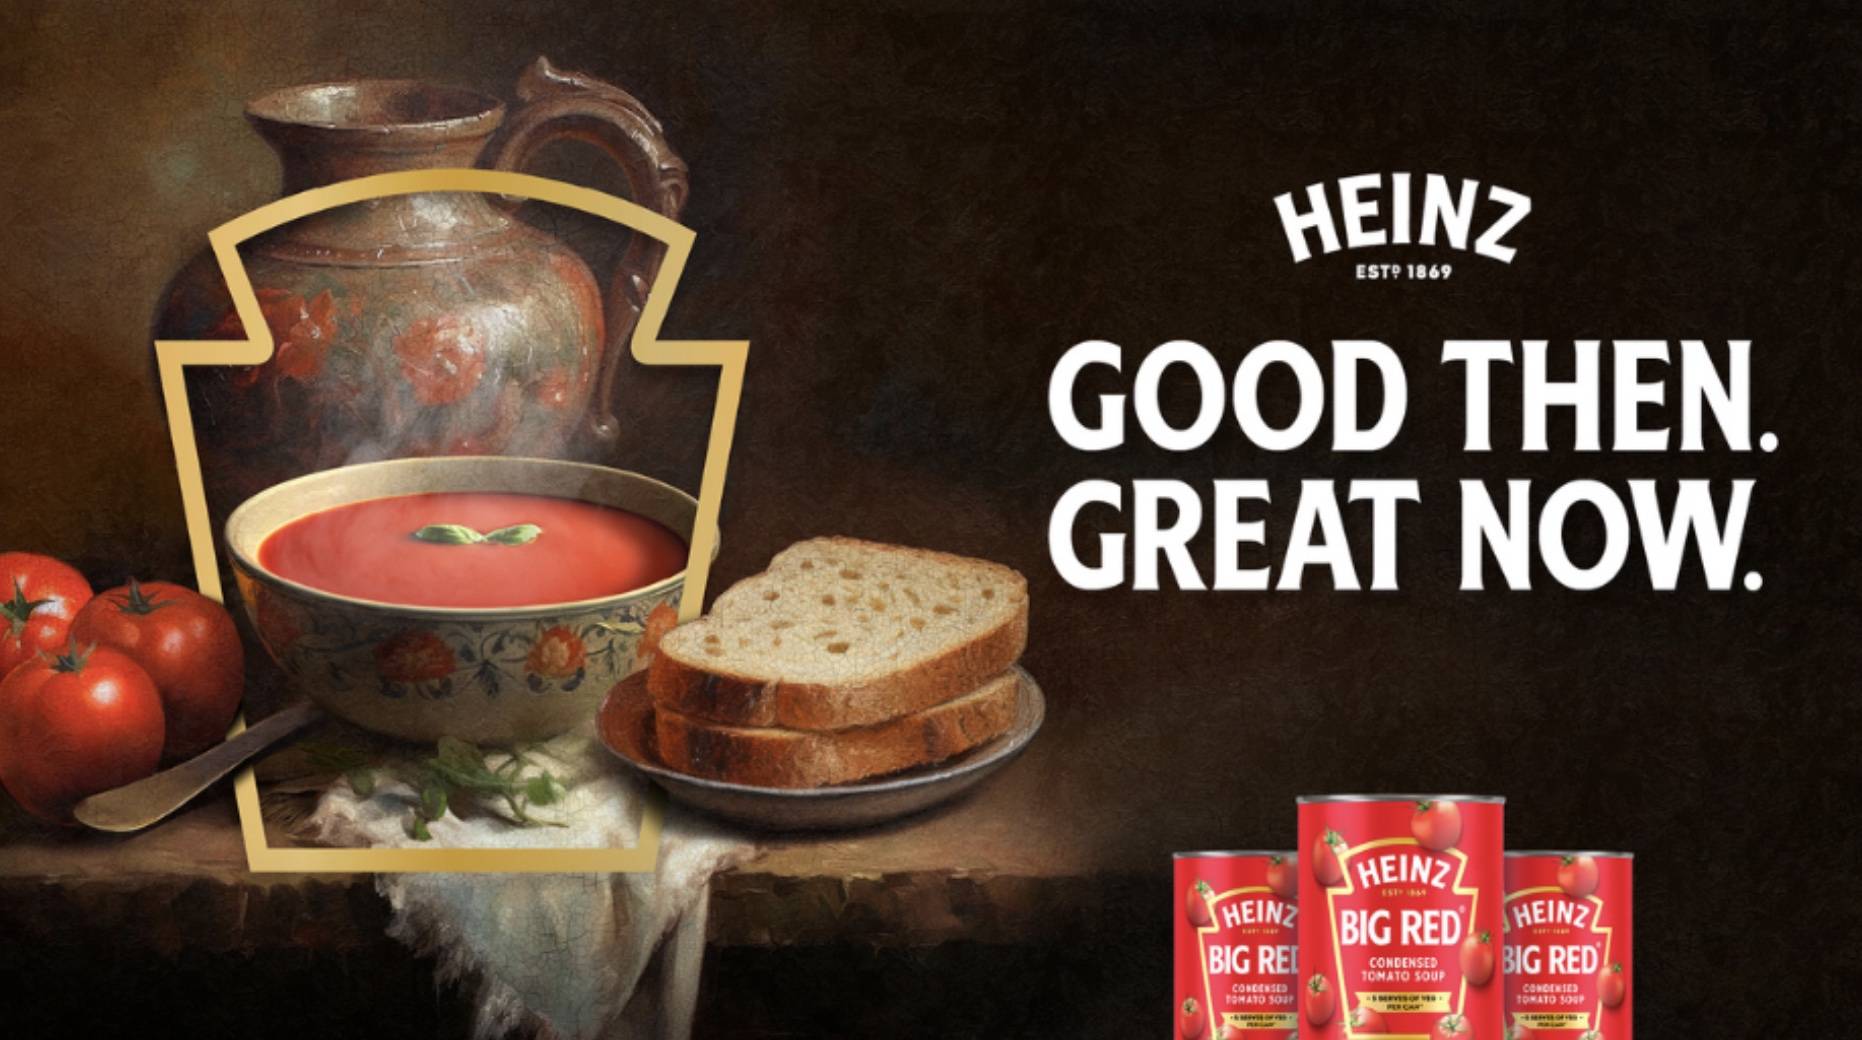 Grilled cheese served with Heinz tomato soup with an old vase behind it. In white copy reads "Heinz. Good Then. Great Now."